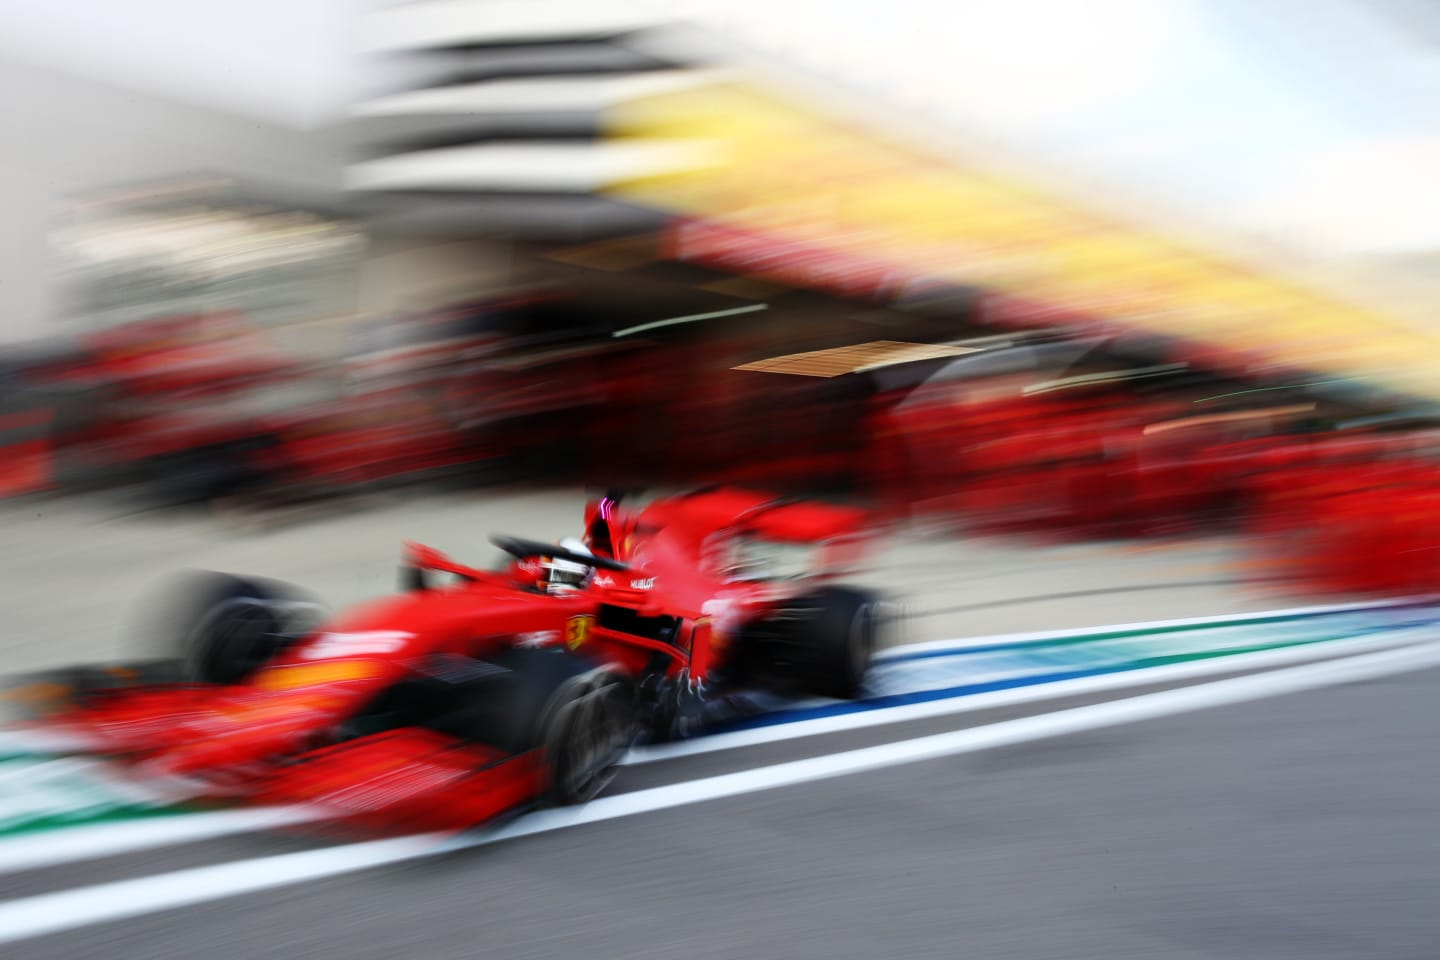 SOCHI, RUSSIA - SEPTEMBER 25: Sebastian Vettel of Germany driving the (5) Scuderia Ferrari SF1000 in the Pitlane during practice ahead of the F1 Grand Prix of Russia at Sochi Autodrom on September 25, 2020 in Sochi, Russia. (Photo by Mark Thompson/Getty Images)